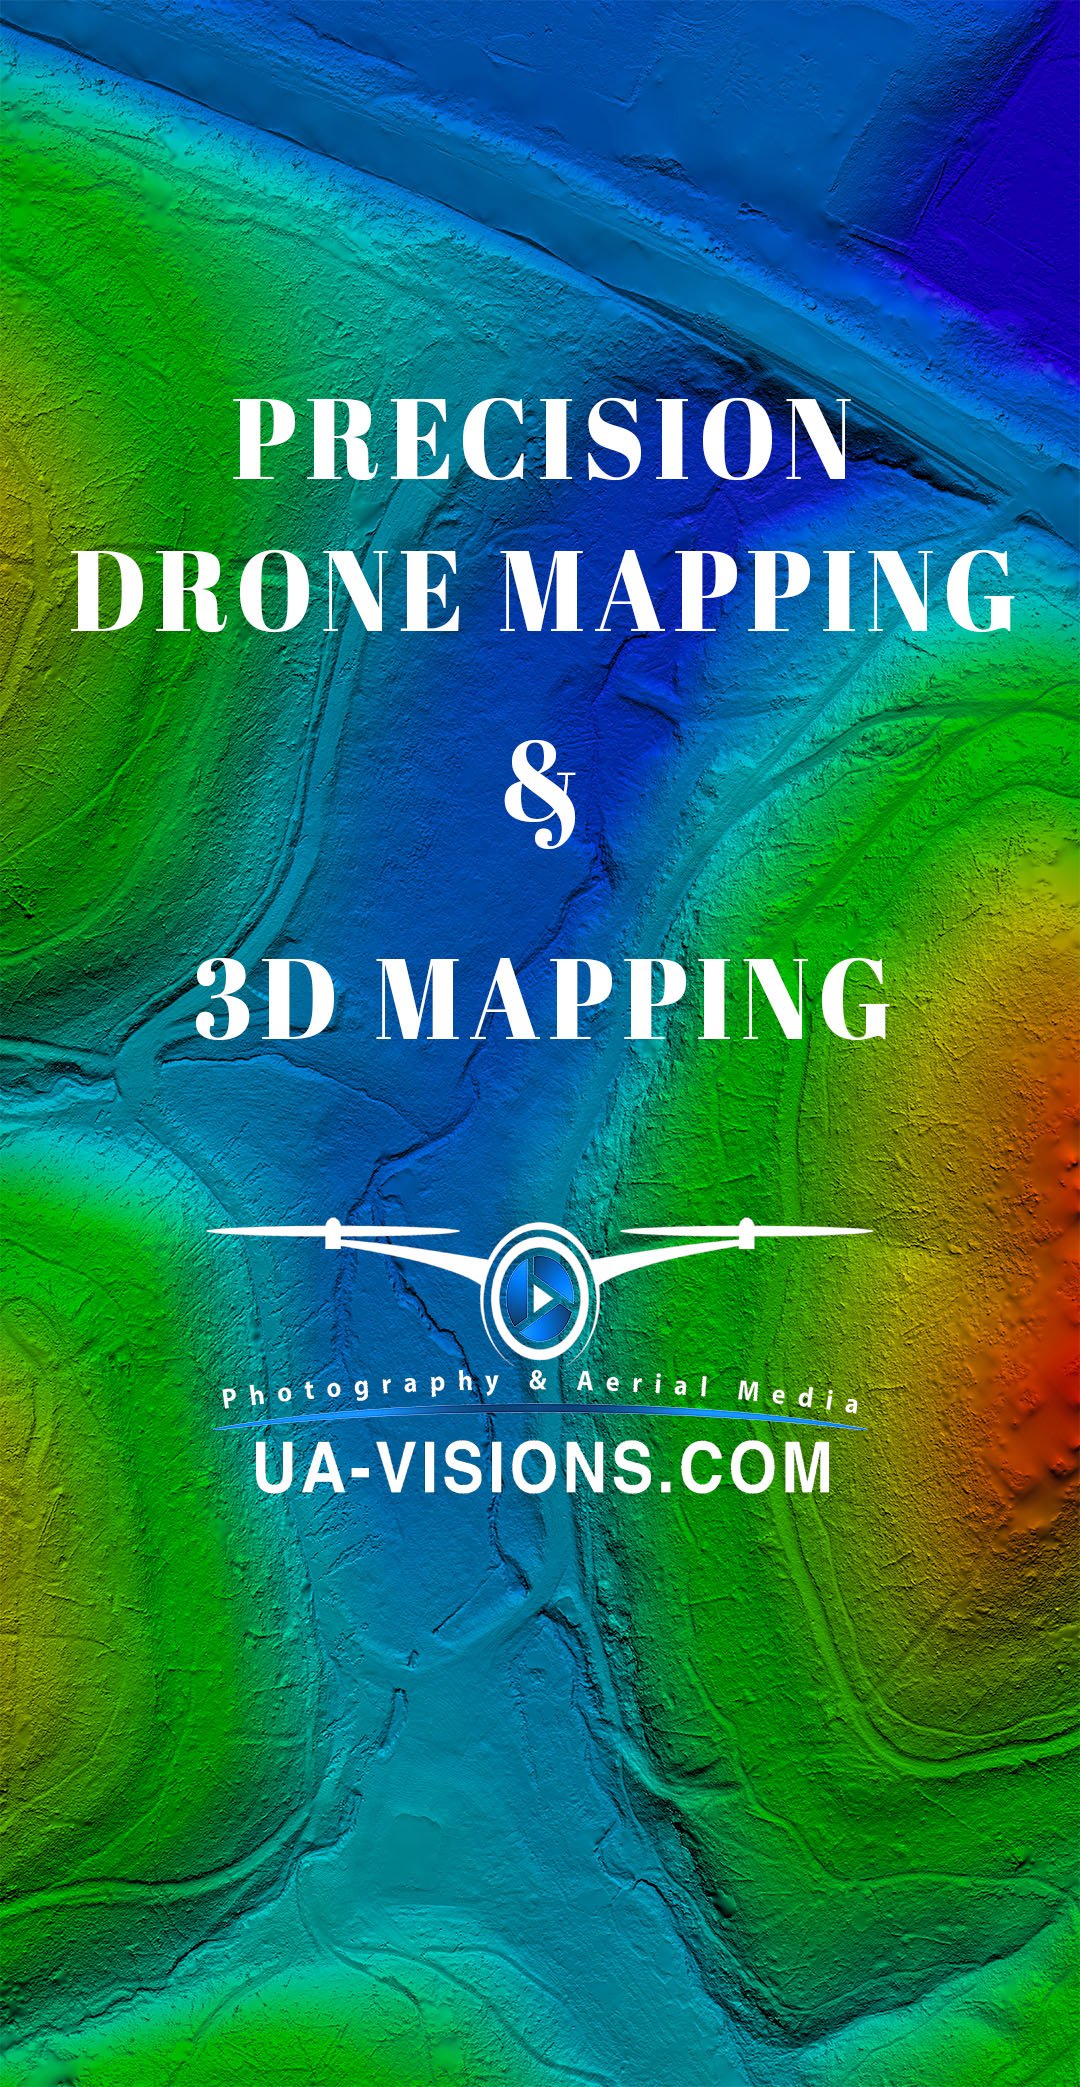 Colorful topographic representation for UA-Visions' drone mapping and 3D modeling services